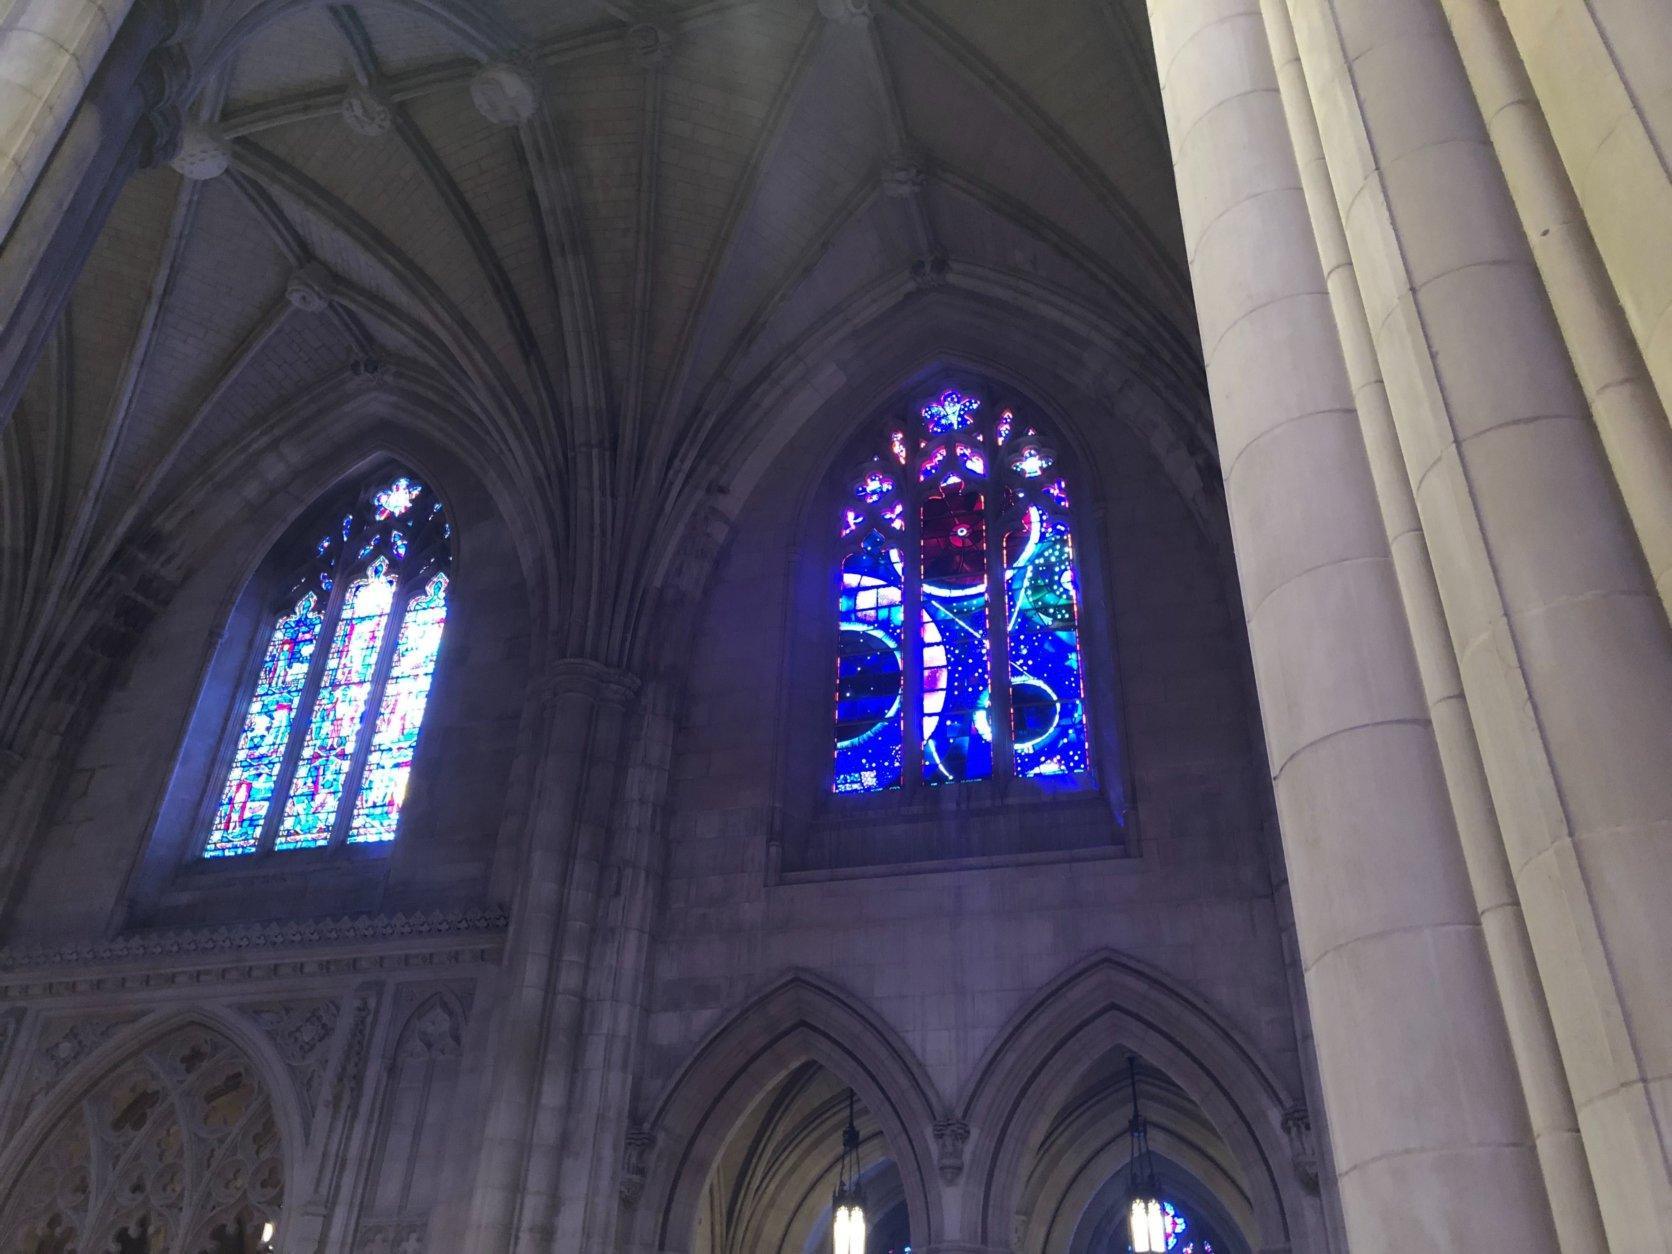 <p>What&#8217;s commonly known now as the &#8220;Space Window&#8221; is the 13th design that was up for consideration as artists and church leaders went back and forth deciding what image would best depict the themes of science, technology and space. By the 12th round of negotiations, the artist had had enough.</p>
